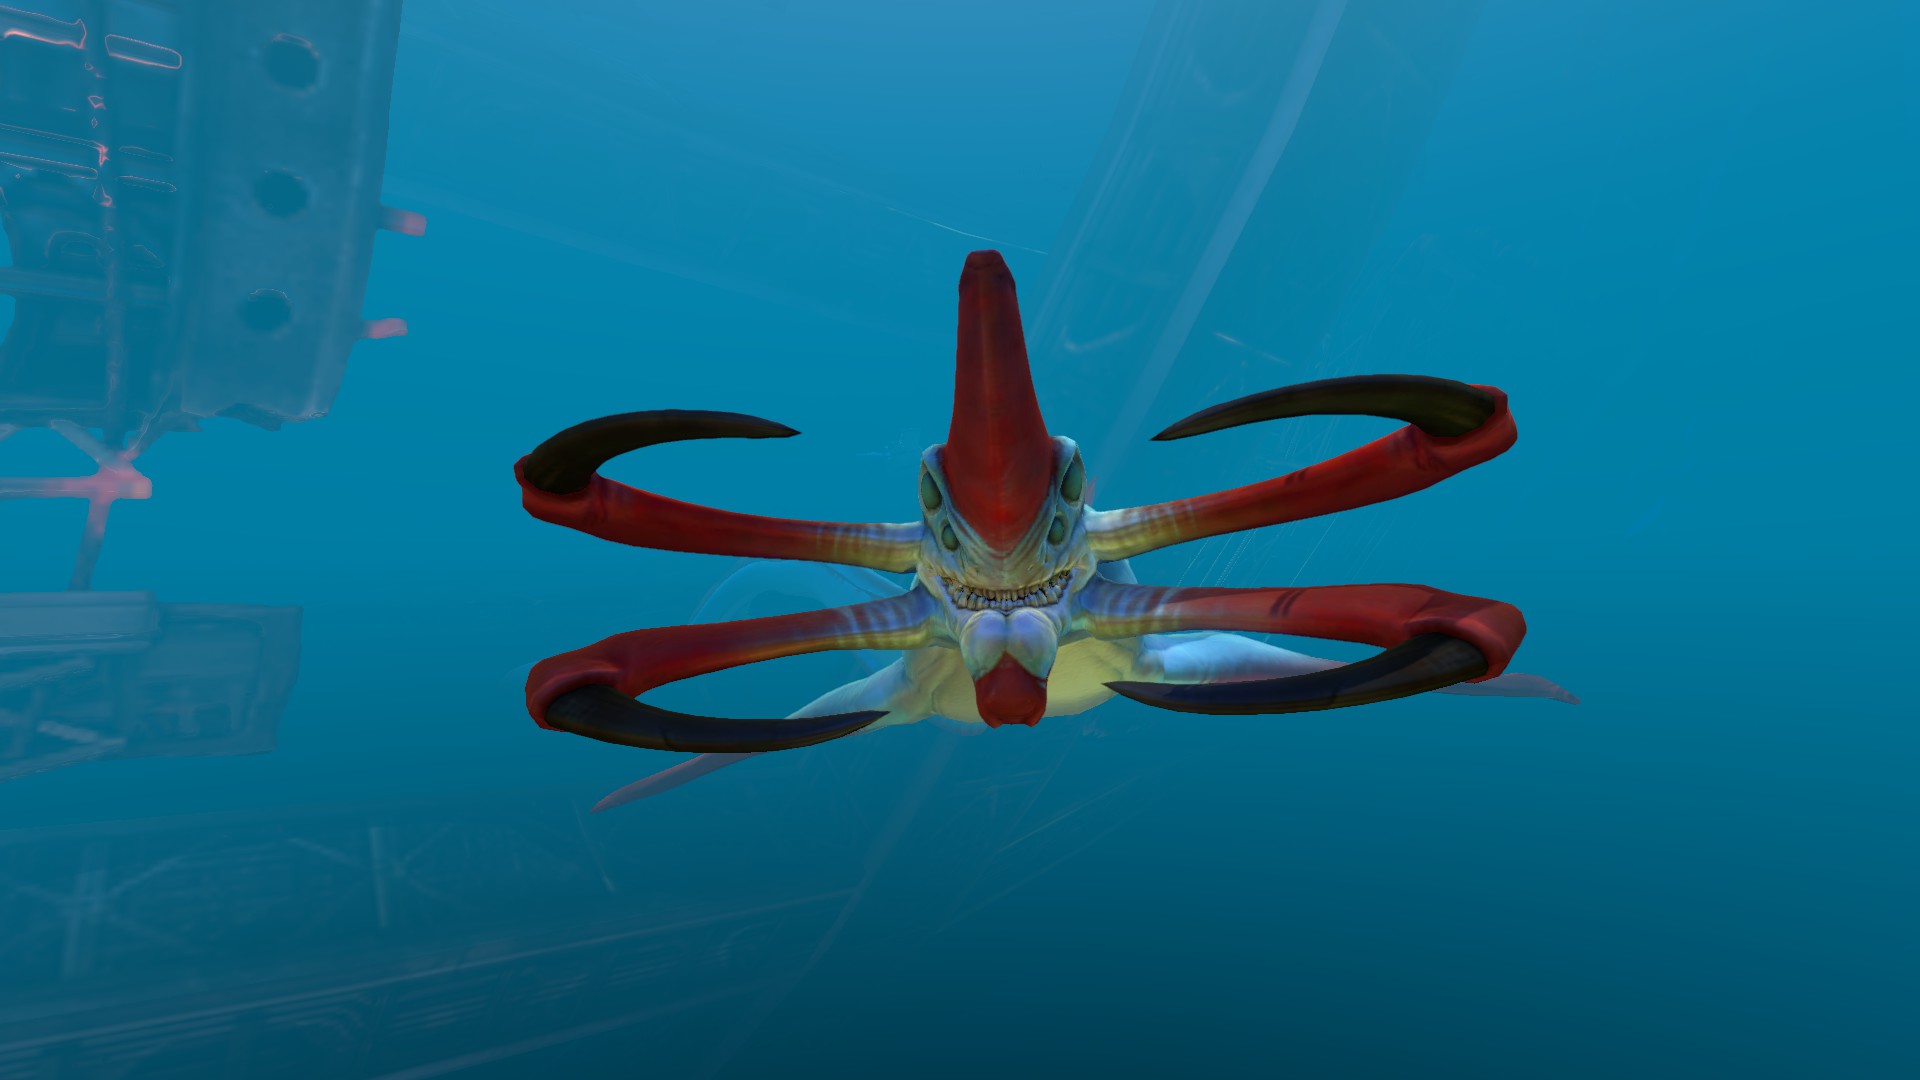 scary reaper leviathan